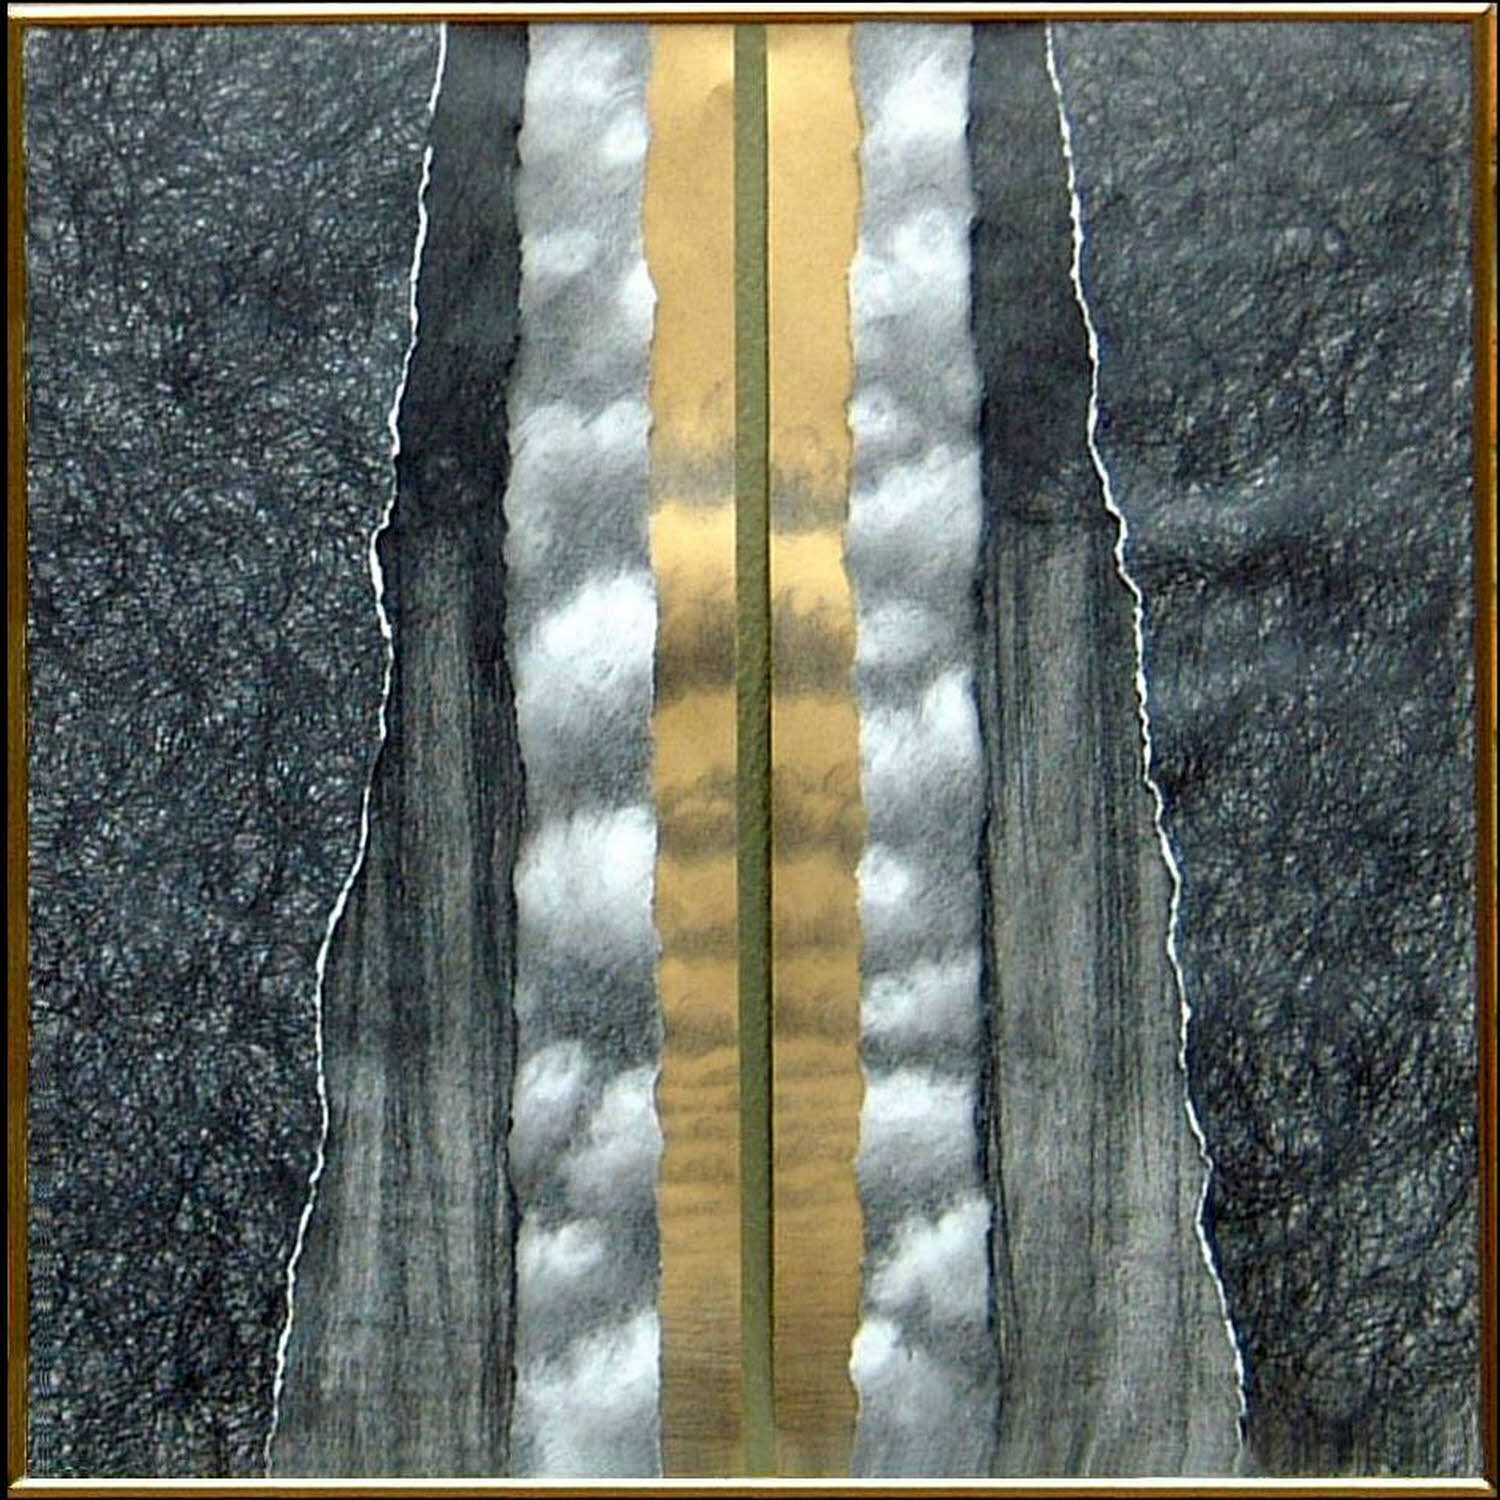 Gold I , 2001, graphite on torn paper, collage, 27x27 inches